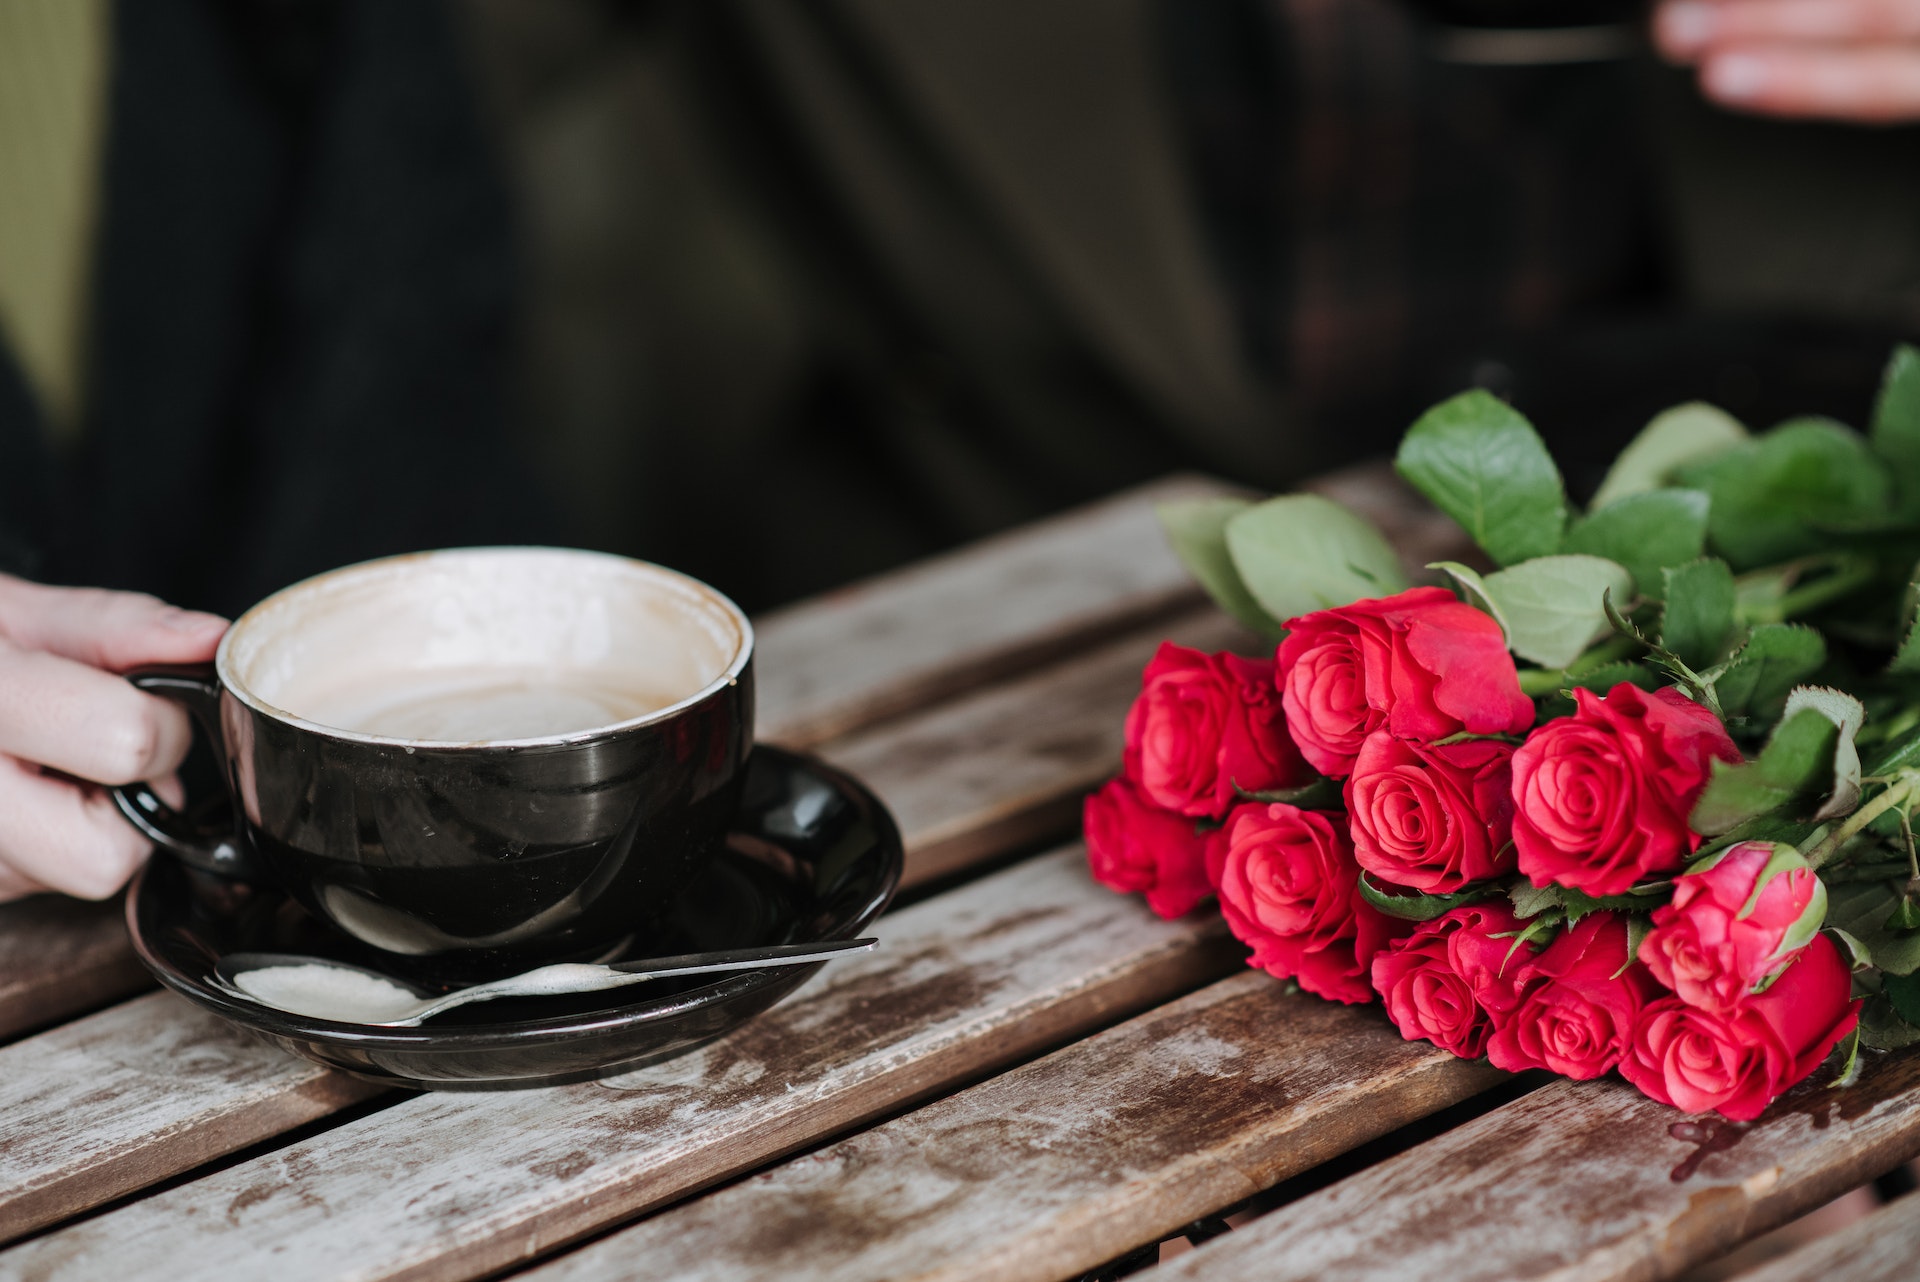 Coffee and roses are a good way to flirt in French.